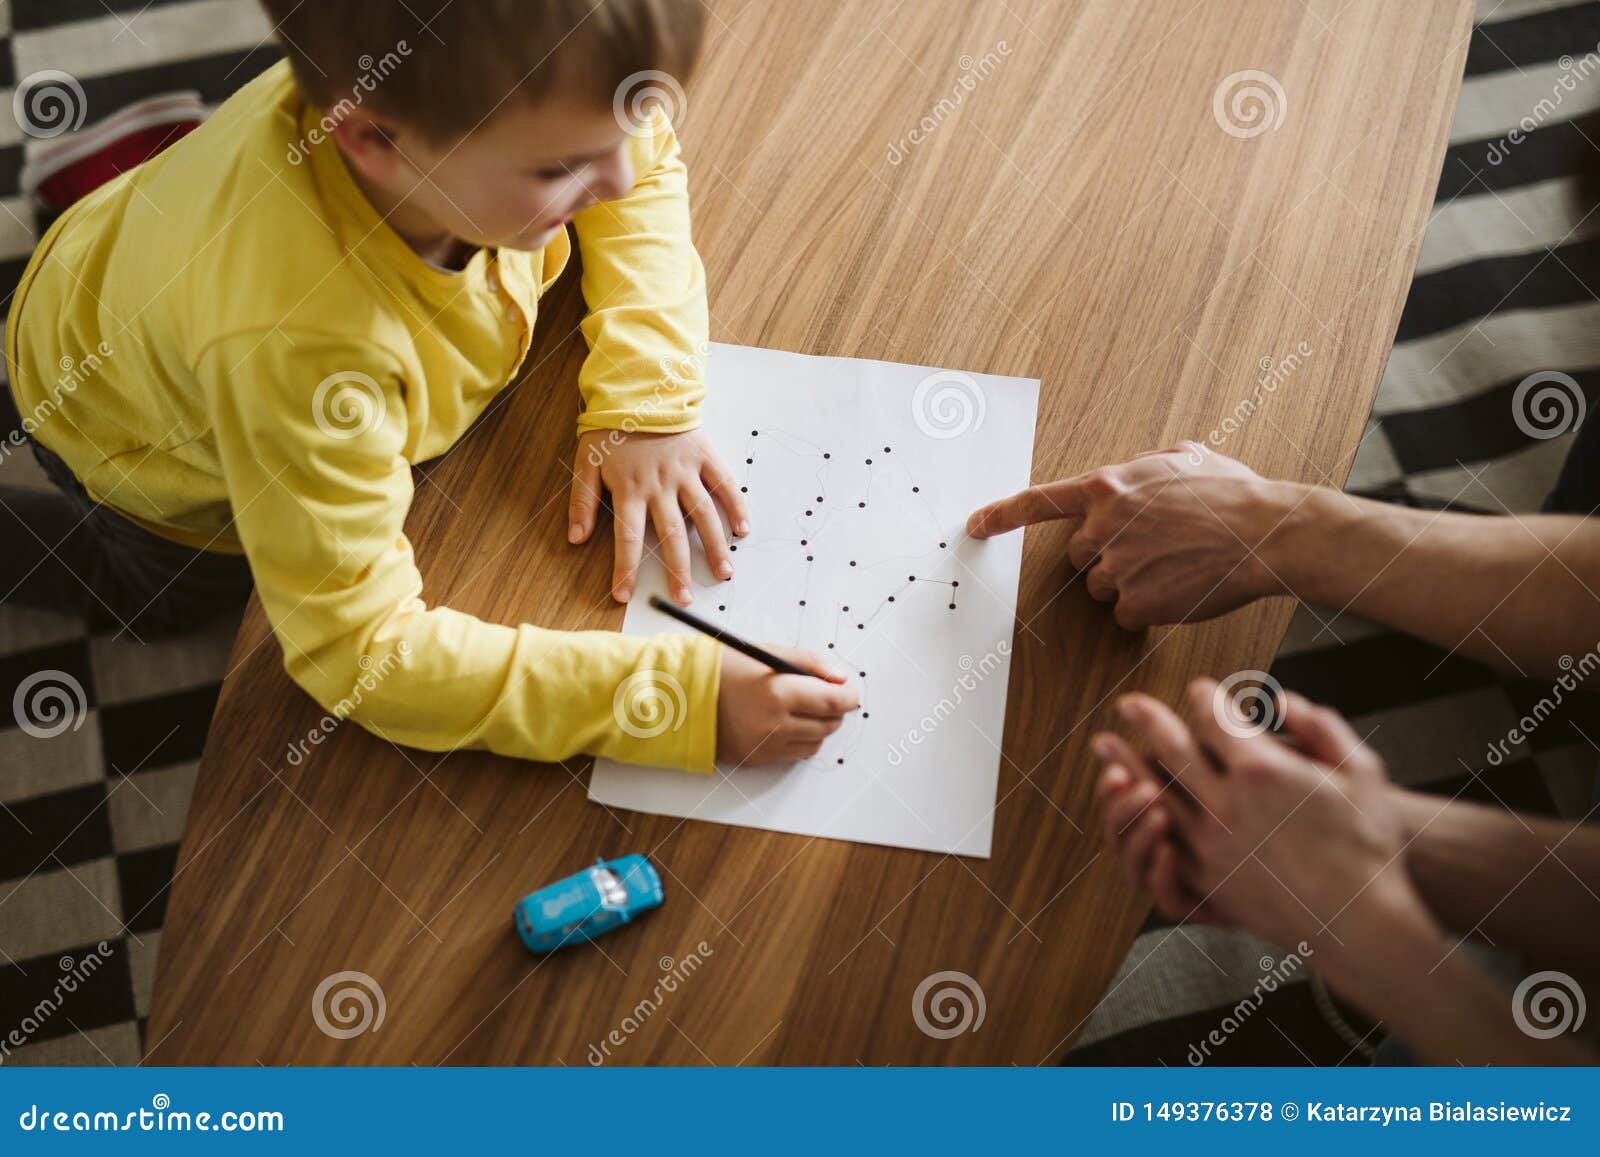 cute boy kneeling on the floor and connecting dots on a piece of paper